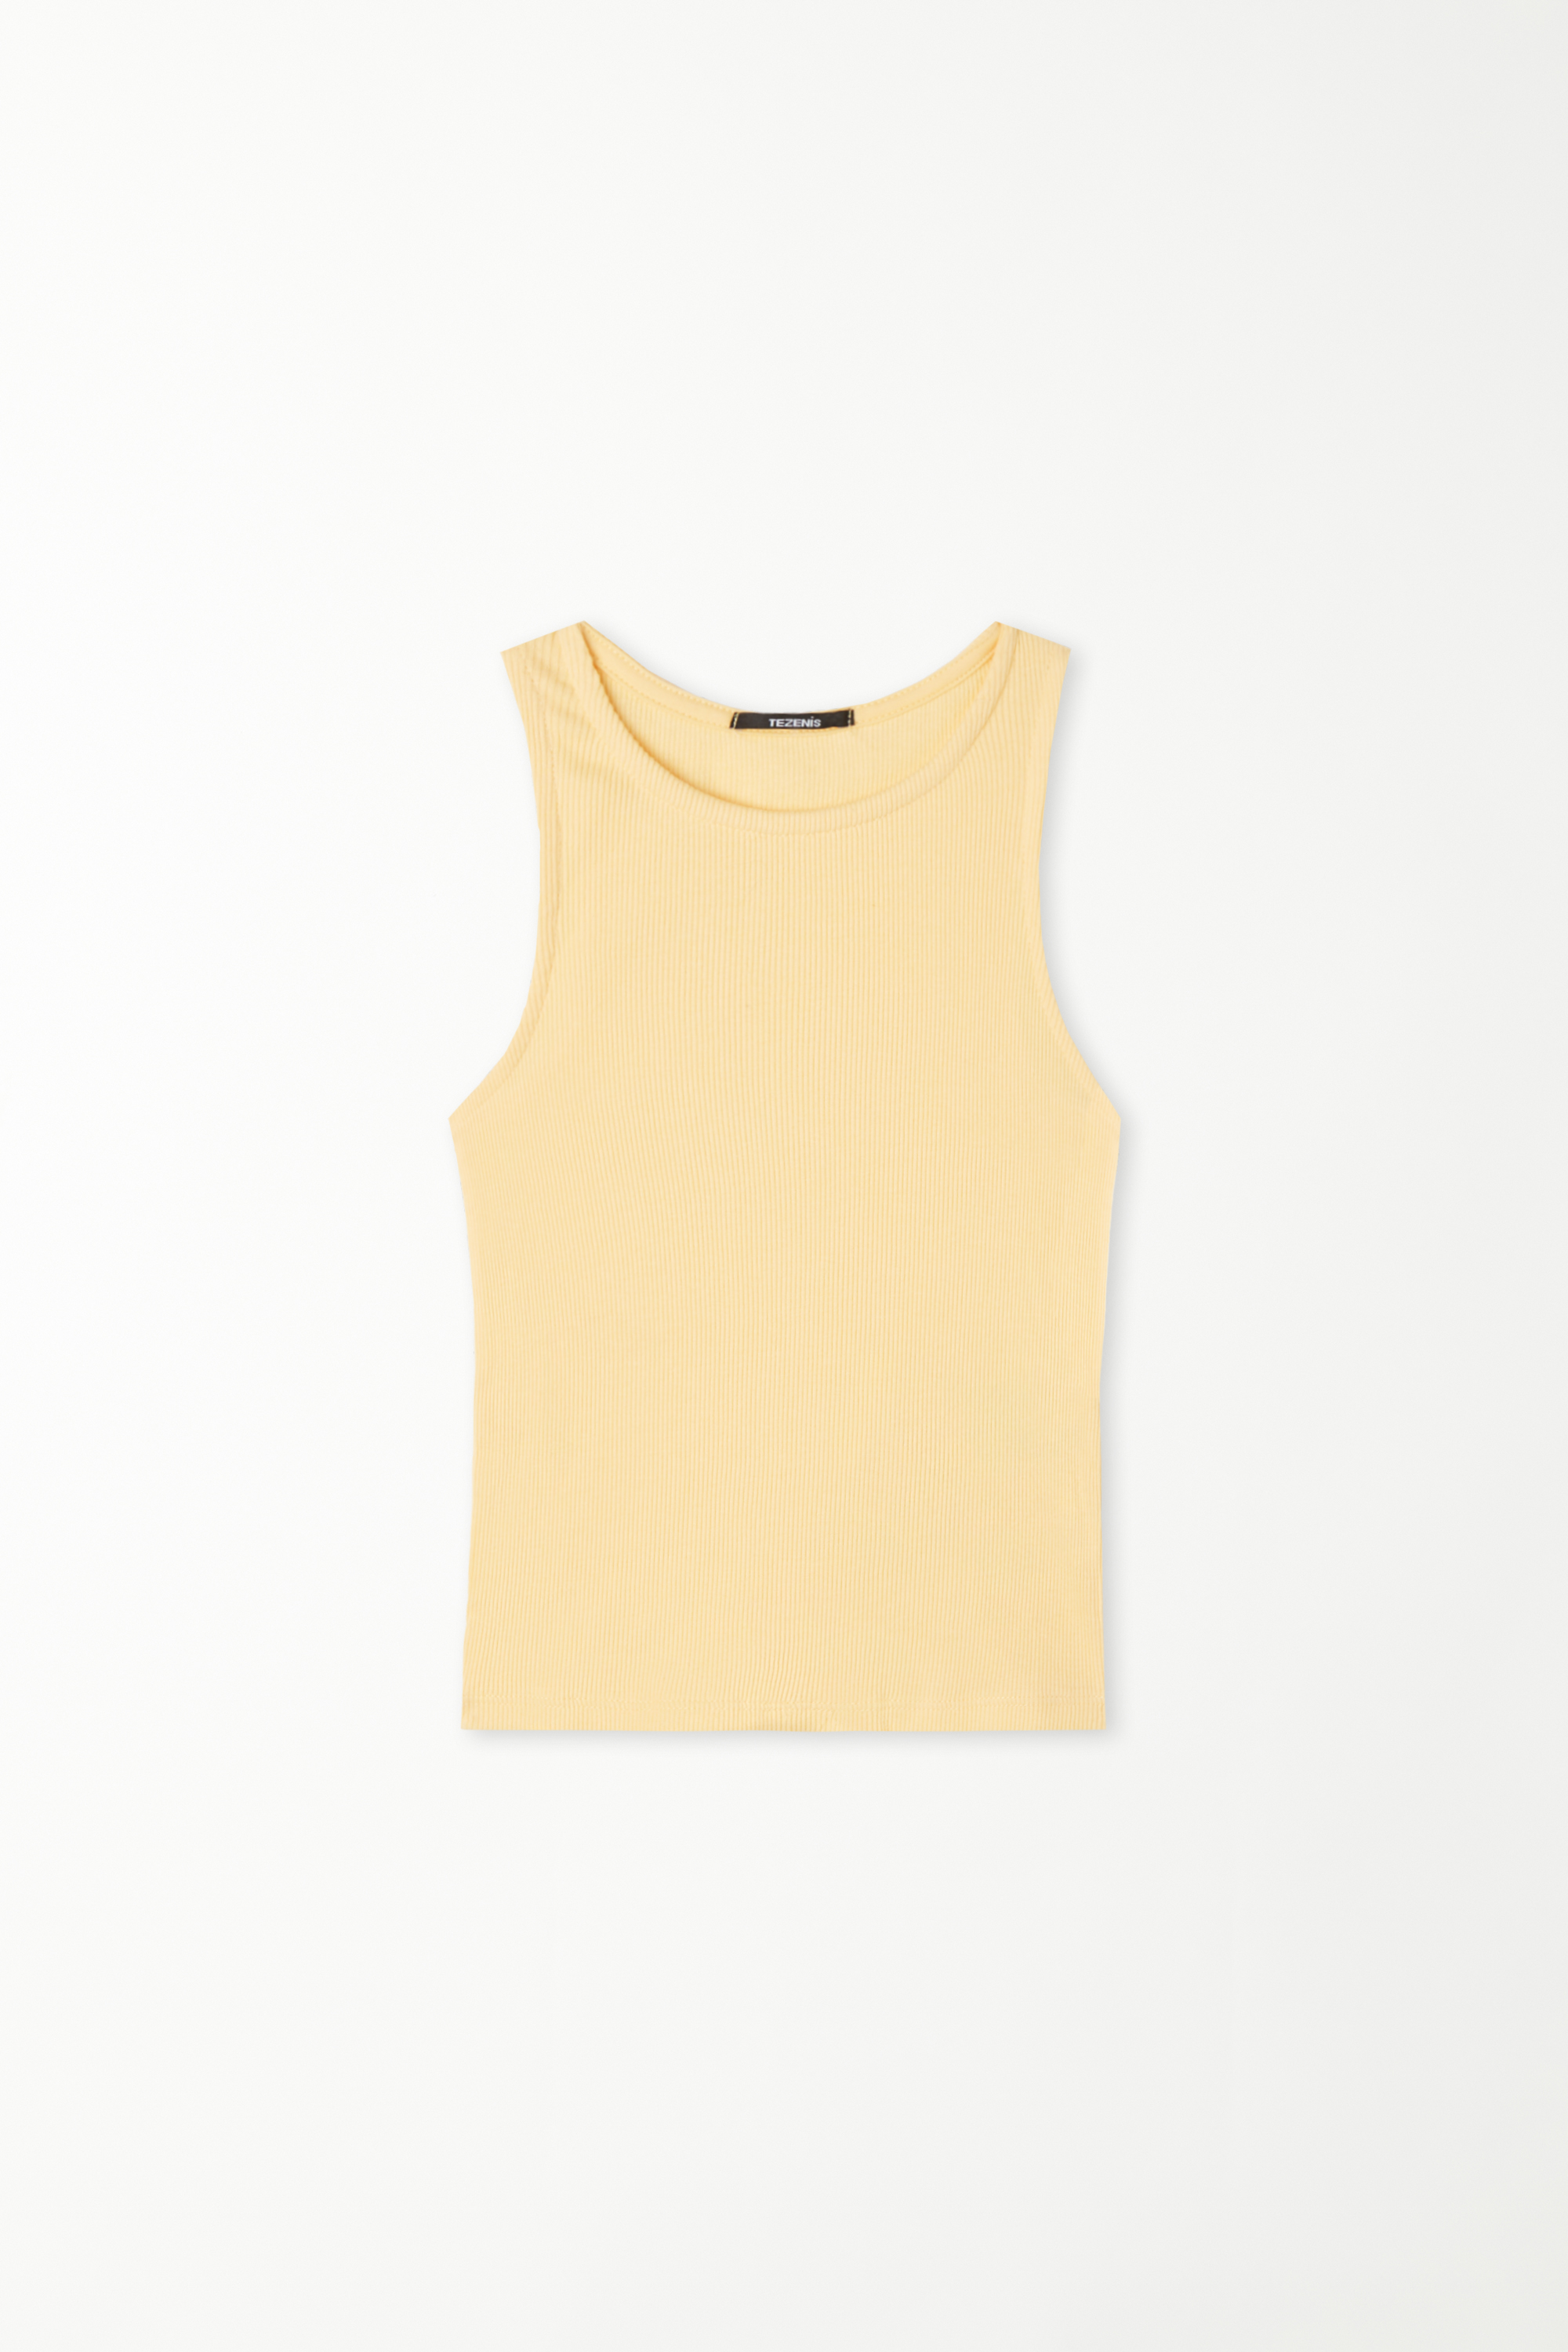 Girls’ Ribbed Camisole with Wide Shoulder Straps